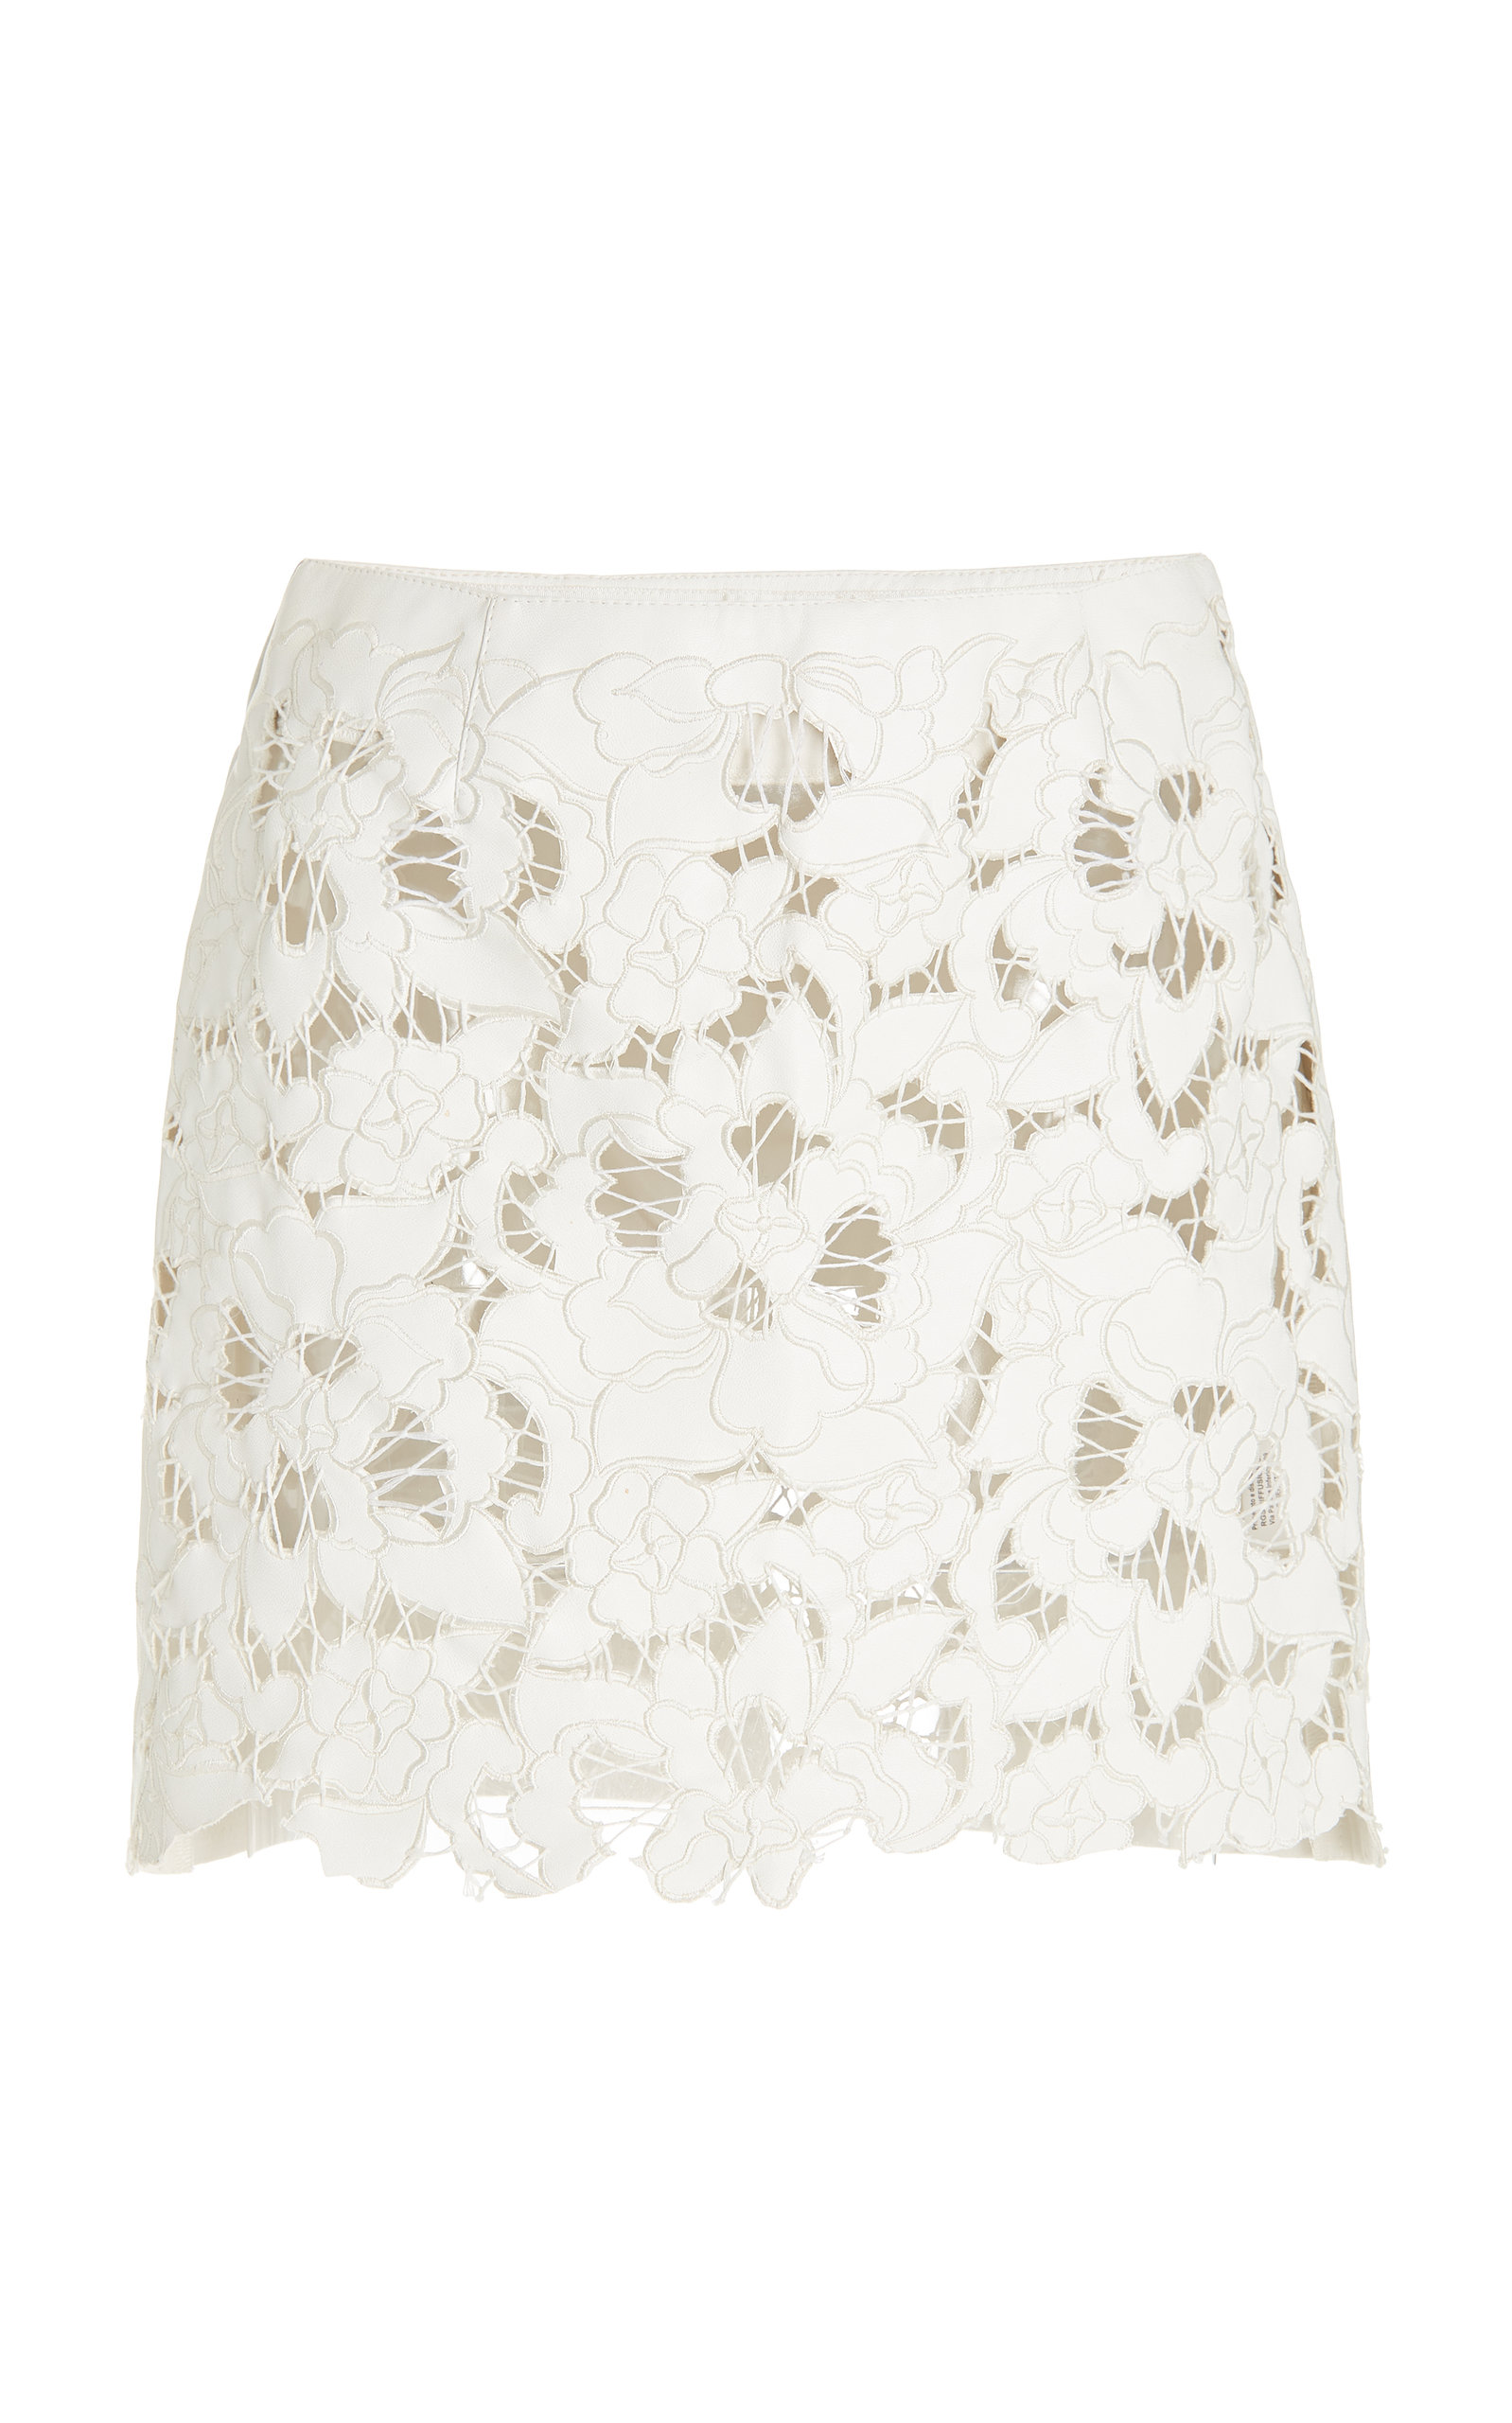 DES_PHEMMES Women's Hand-Embroidered Eco-Leather Mini Skirt